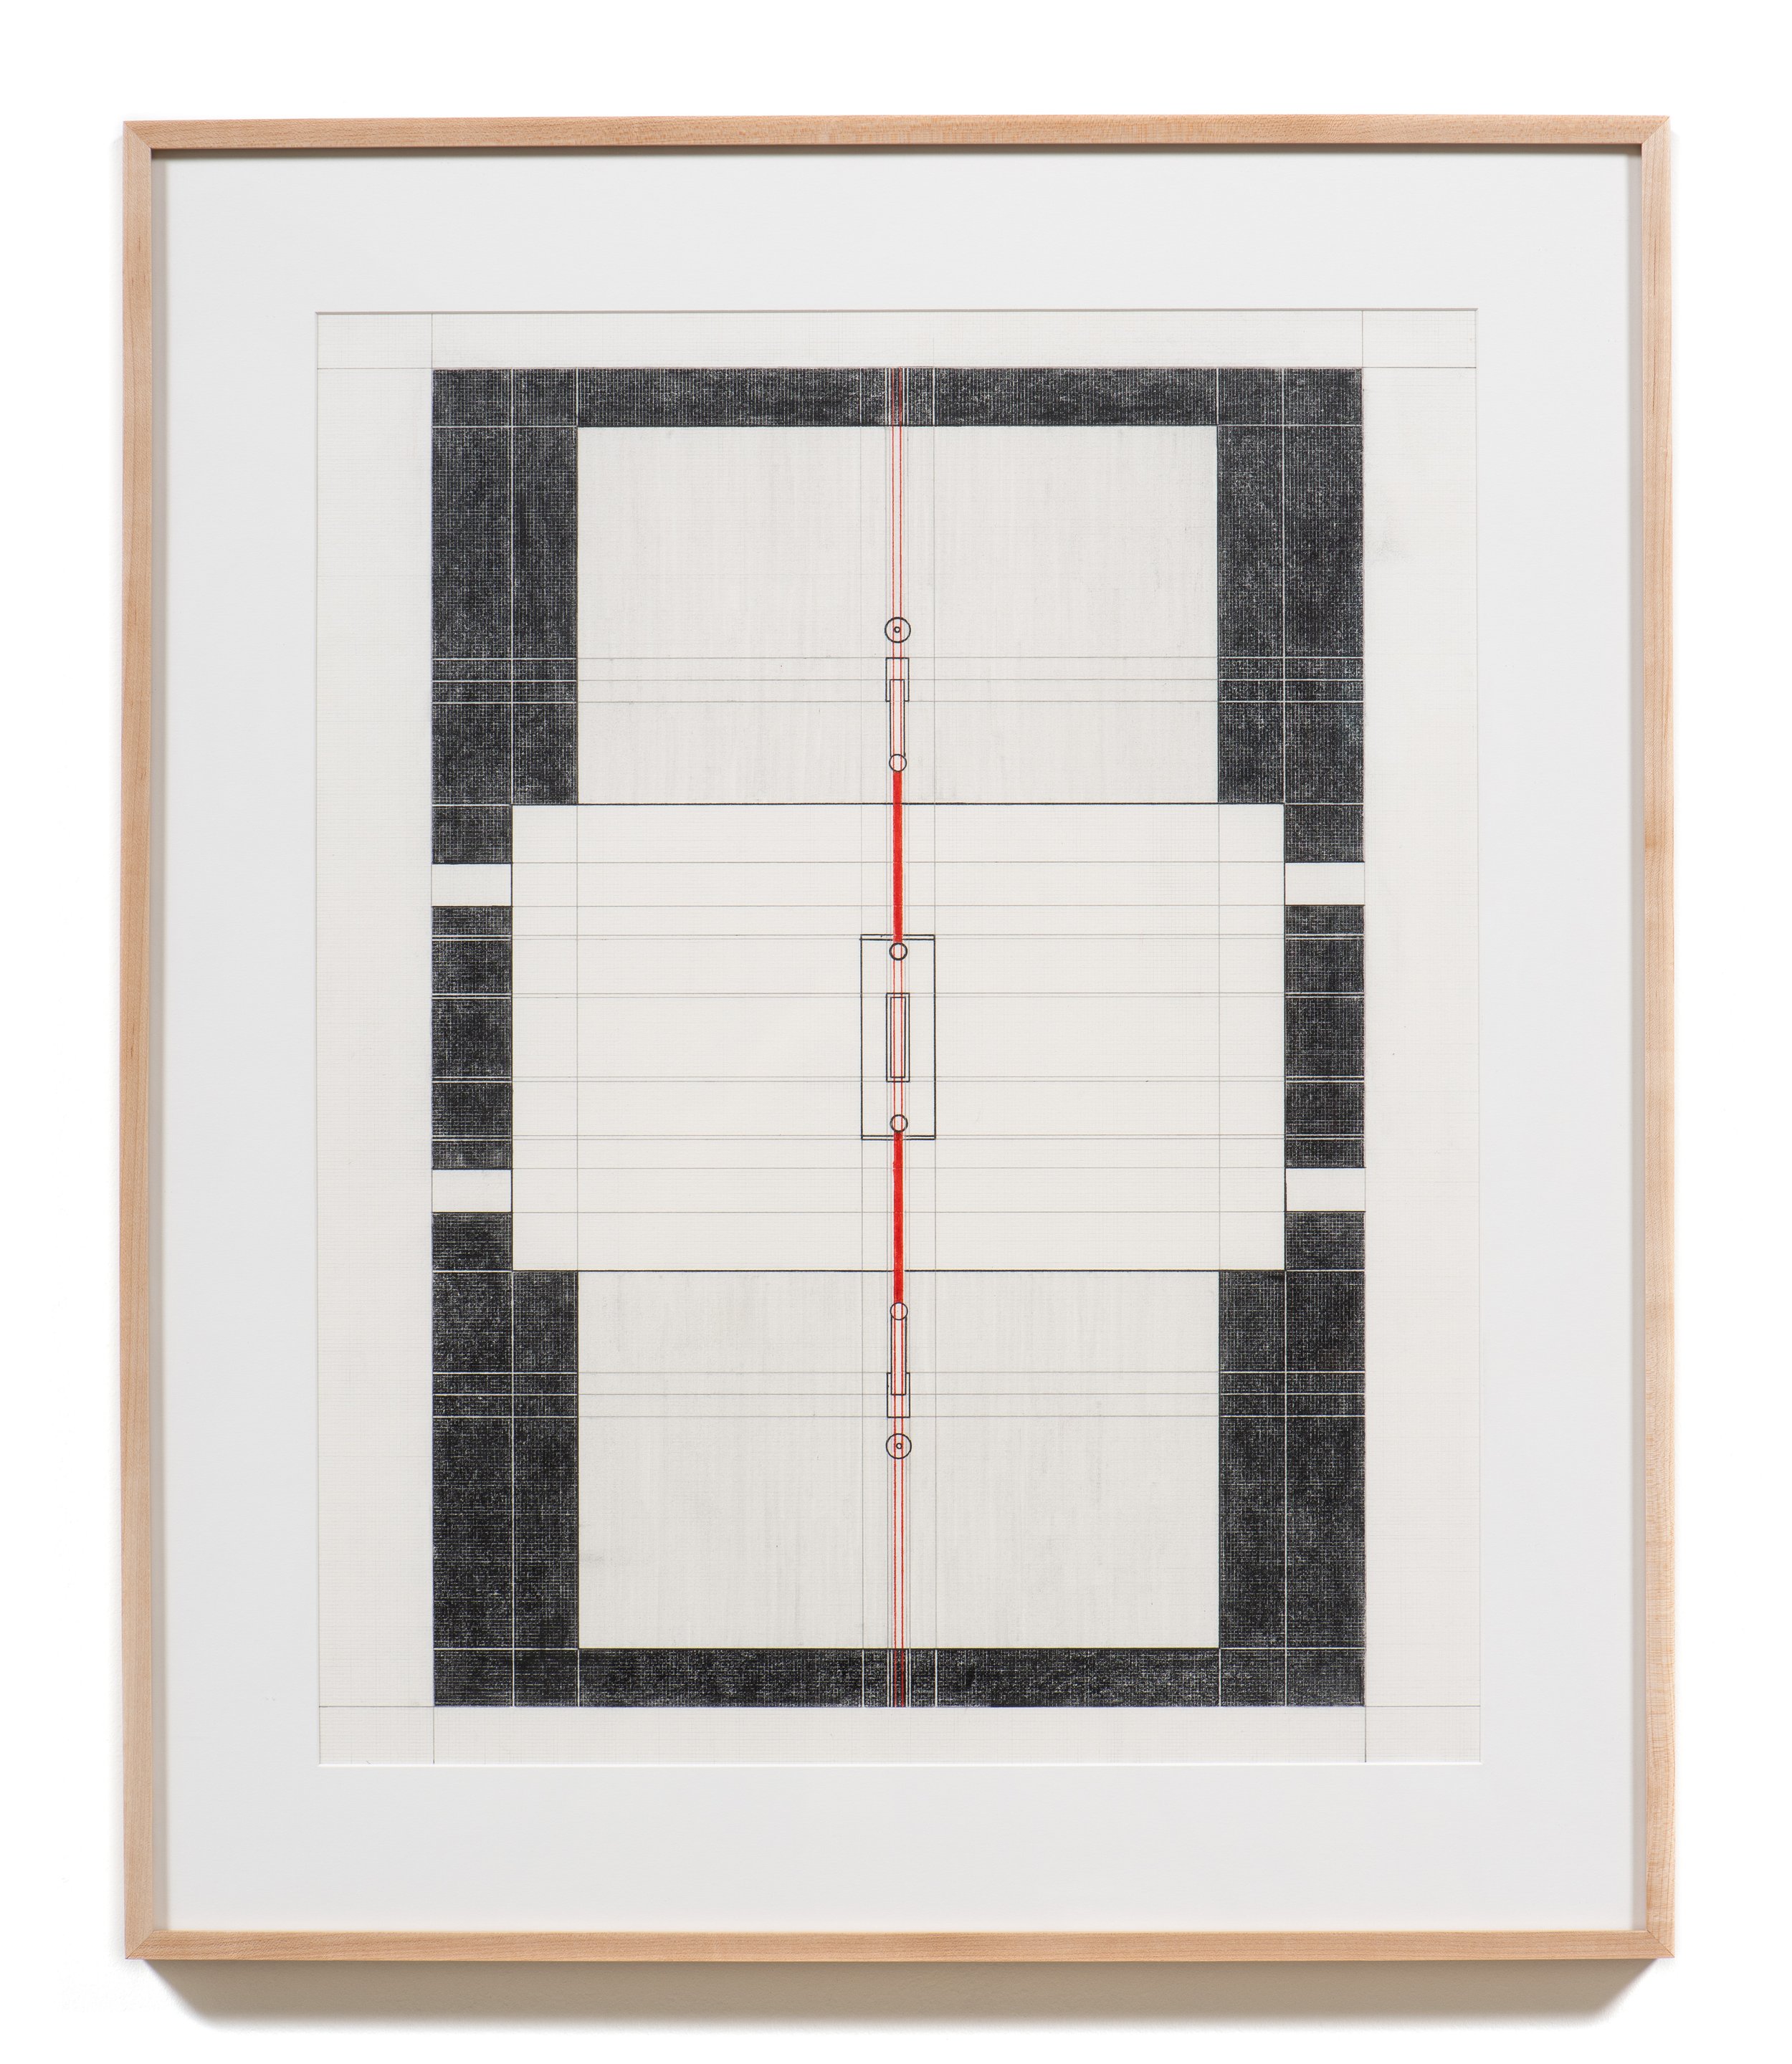  Rachael Browning  Ferguson Perforations,  2021 Graphite and colored pencil on paper 36 x 31 x 1 1/2 inches (framed) 